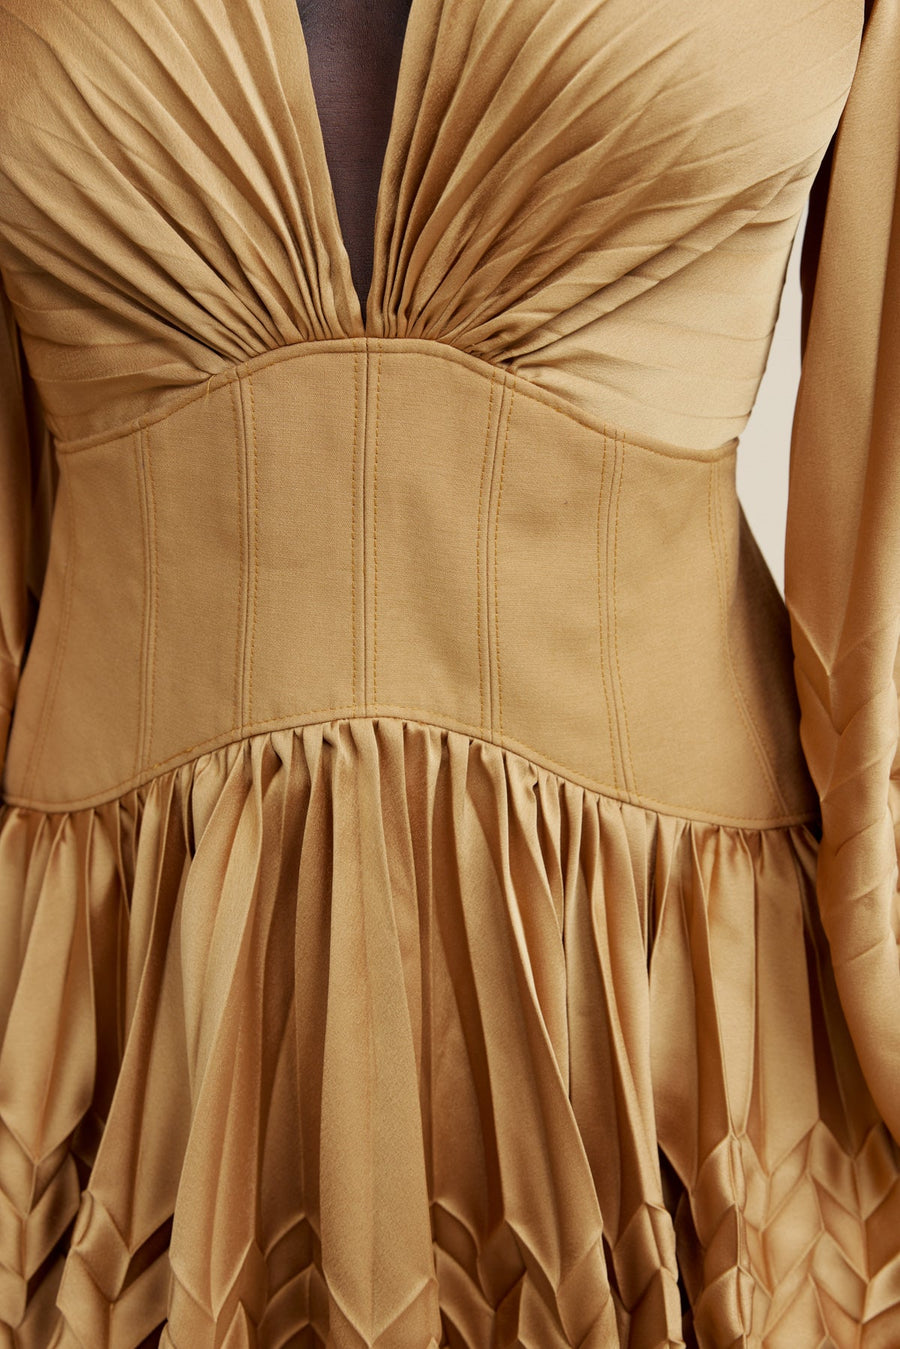 Acler - Marion Dress in Caramel